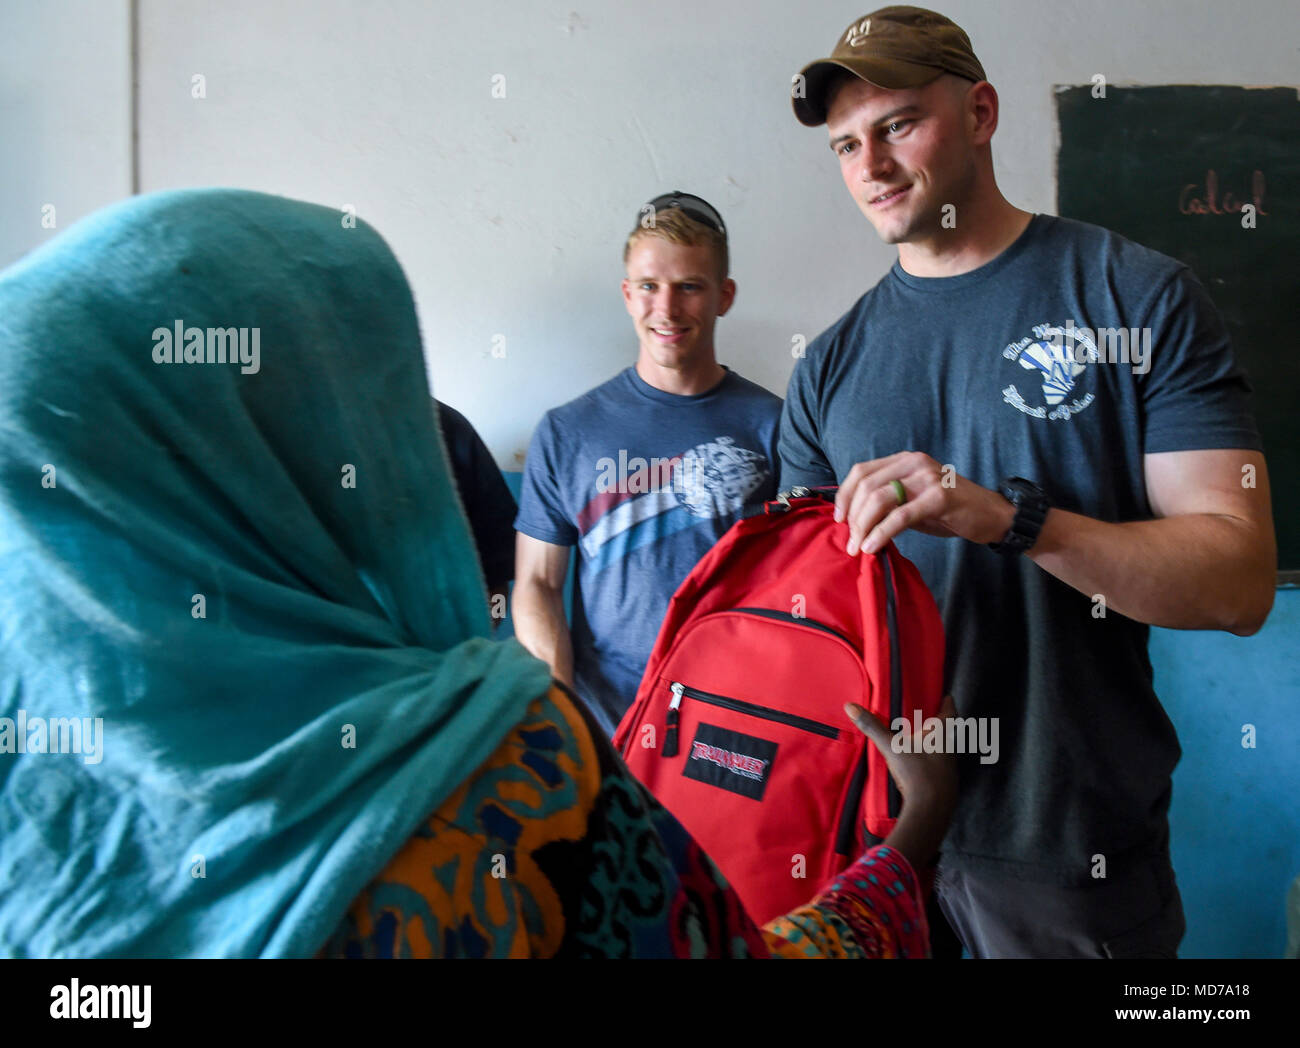 U.S. Army 1st Lt. Aidan Dietz, with Animal Company, 3rd Battalion, 141st Infantry Regiment, assigned to Combined Joint Task Force - Horn of Africa (CJTF-HOA), hands a backpack filled with school supplies a Somali child in Ali Oune, Djibouti, March 28, 2018. CJTF-HOA service members donated more than $400 of school supplies and sandals to Somali refugee students in Djibouti.  (U.S. Air Force photo by Staff Sgt. Timothy Moore) Stock Photo